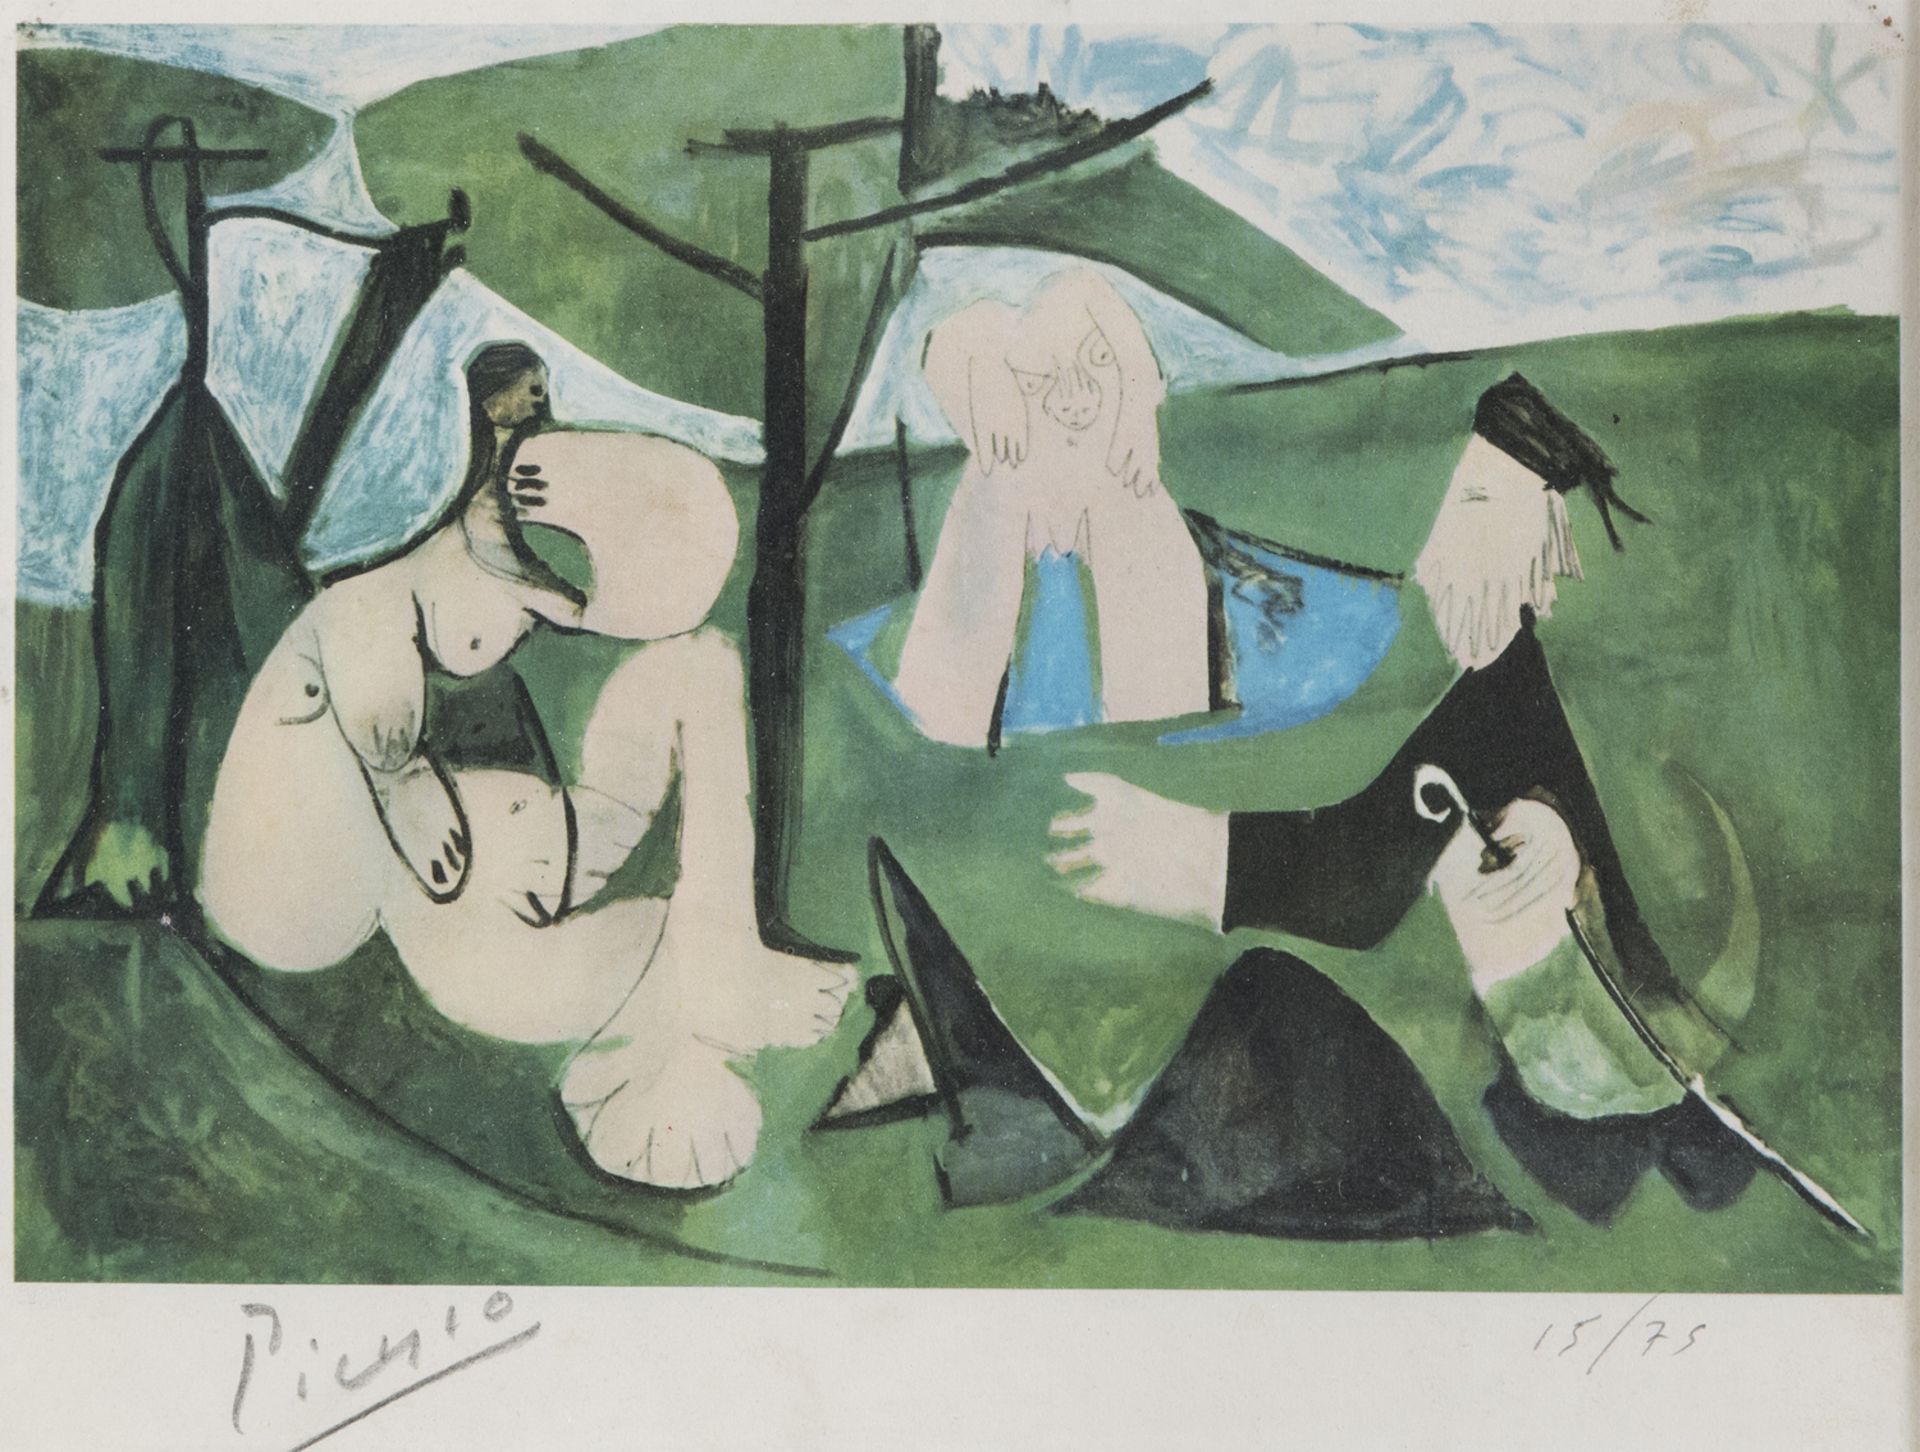 REPRODUCTION OF A LITHOGRAPHY BY PABLO PICASSO